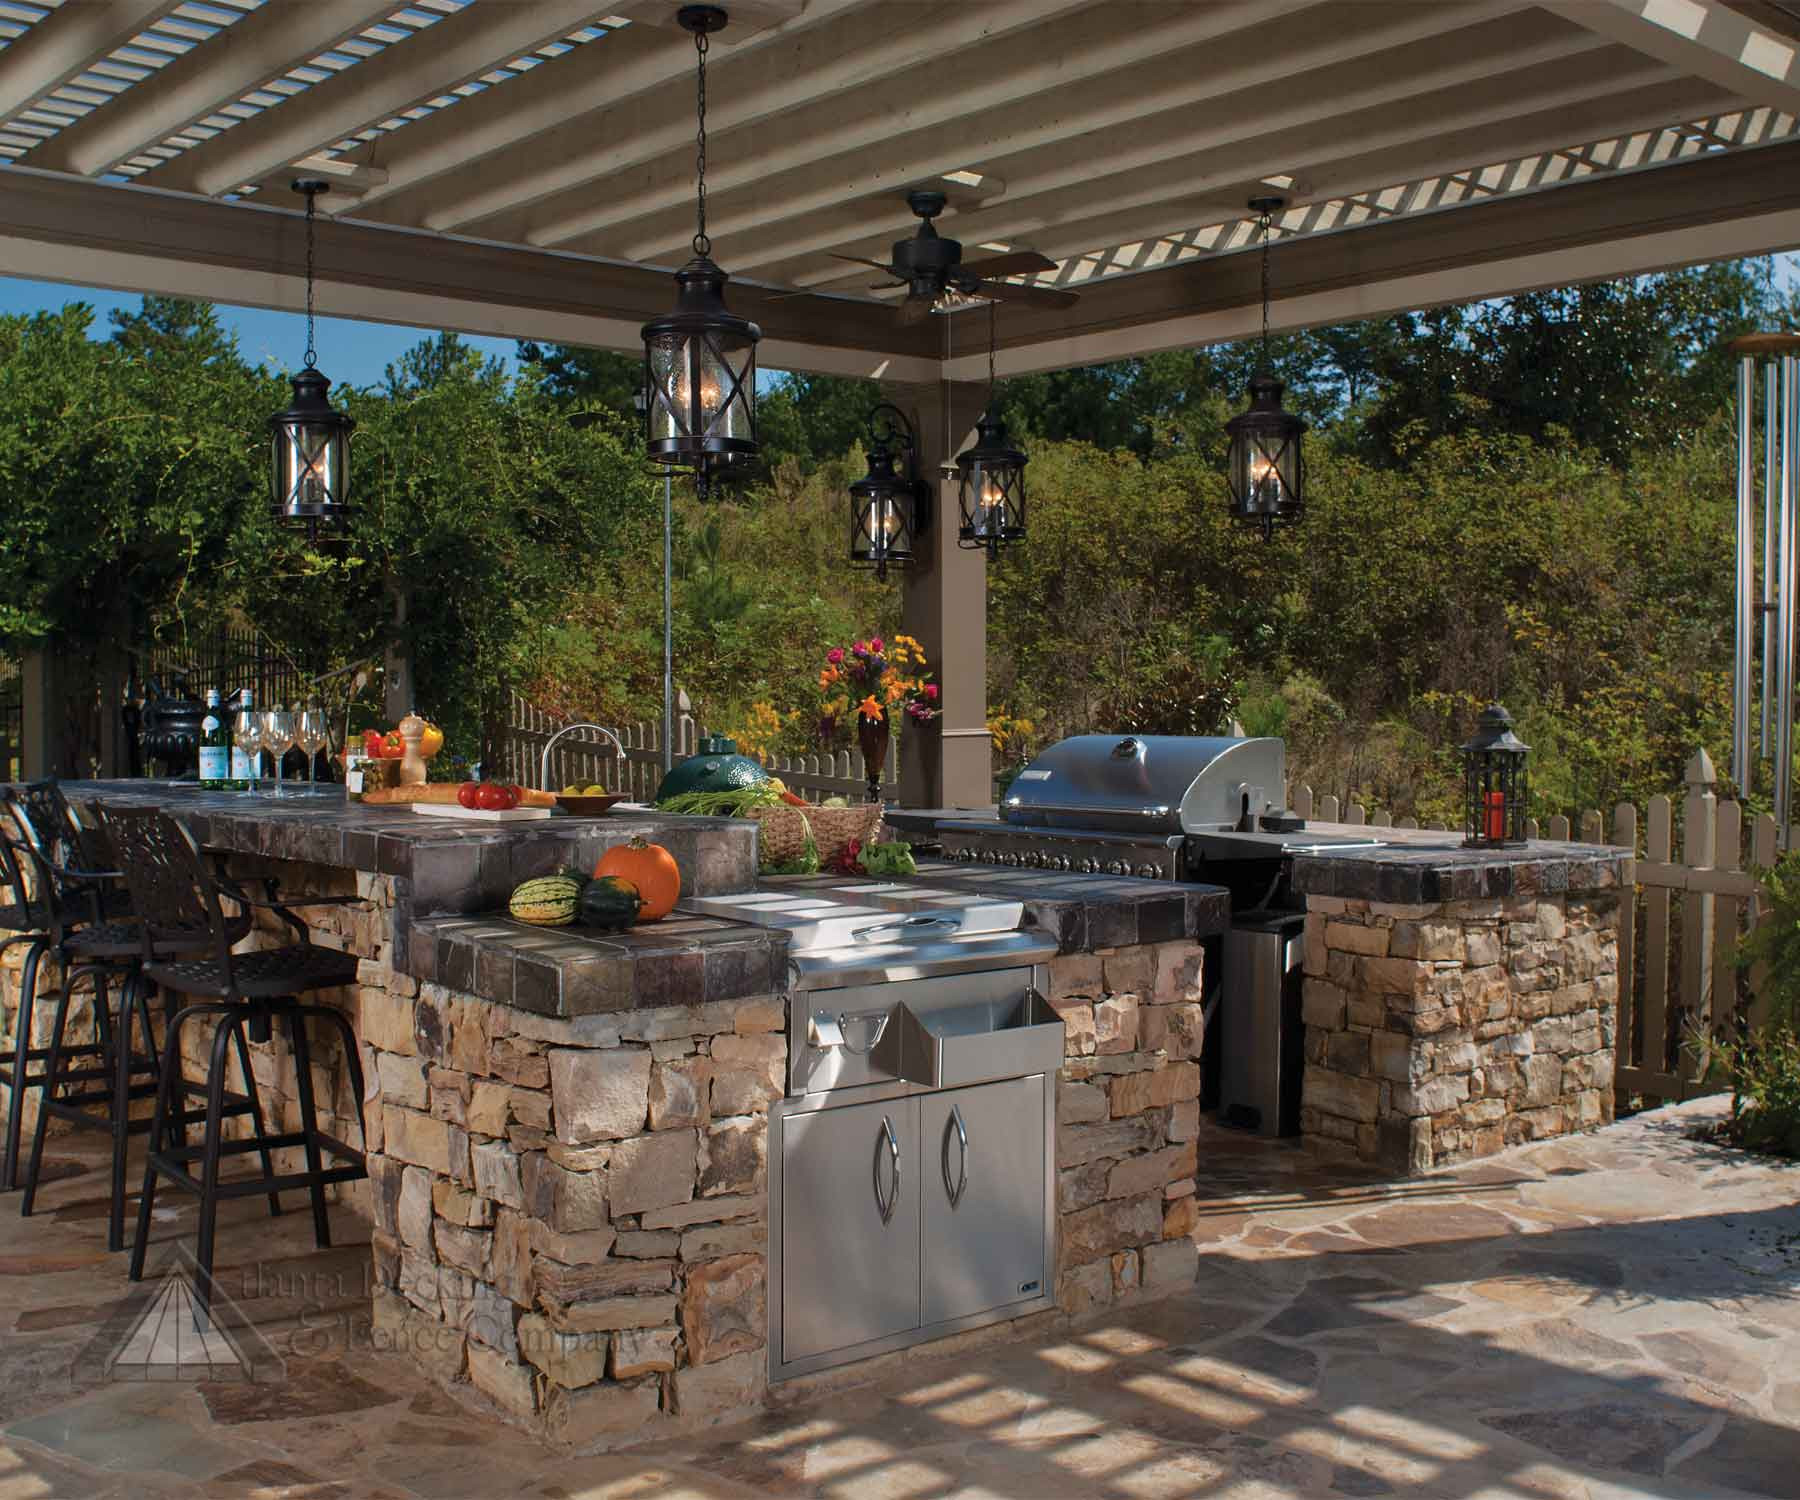 Outdoor Patio Kitchen
 Outdoor Kitchen Designing The Perfect Backyard Cooking